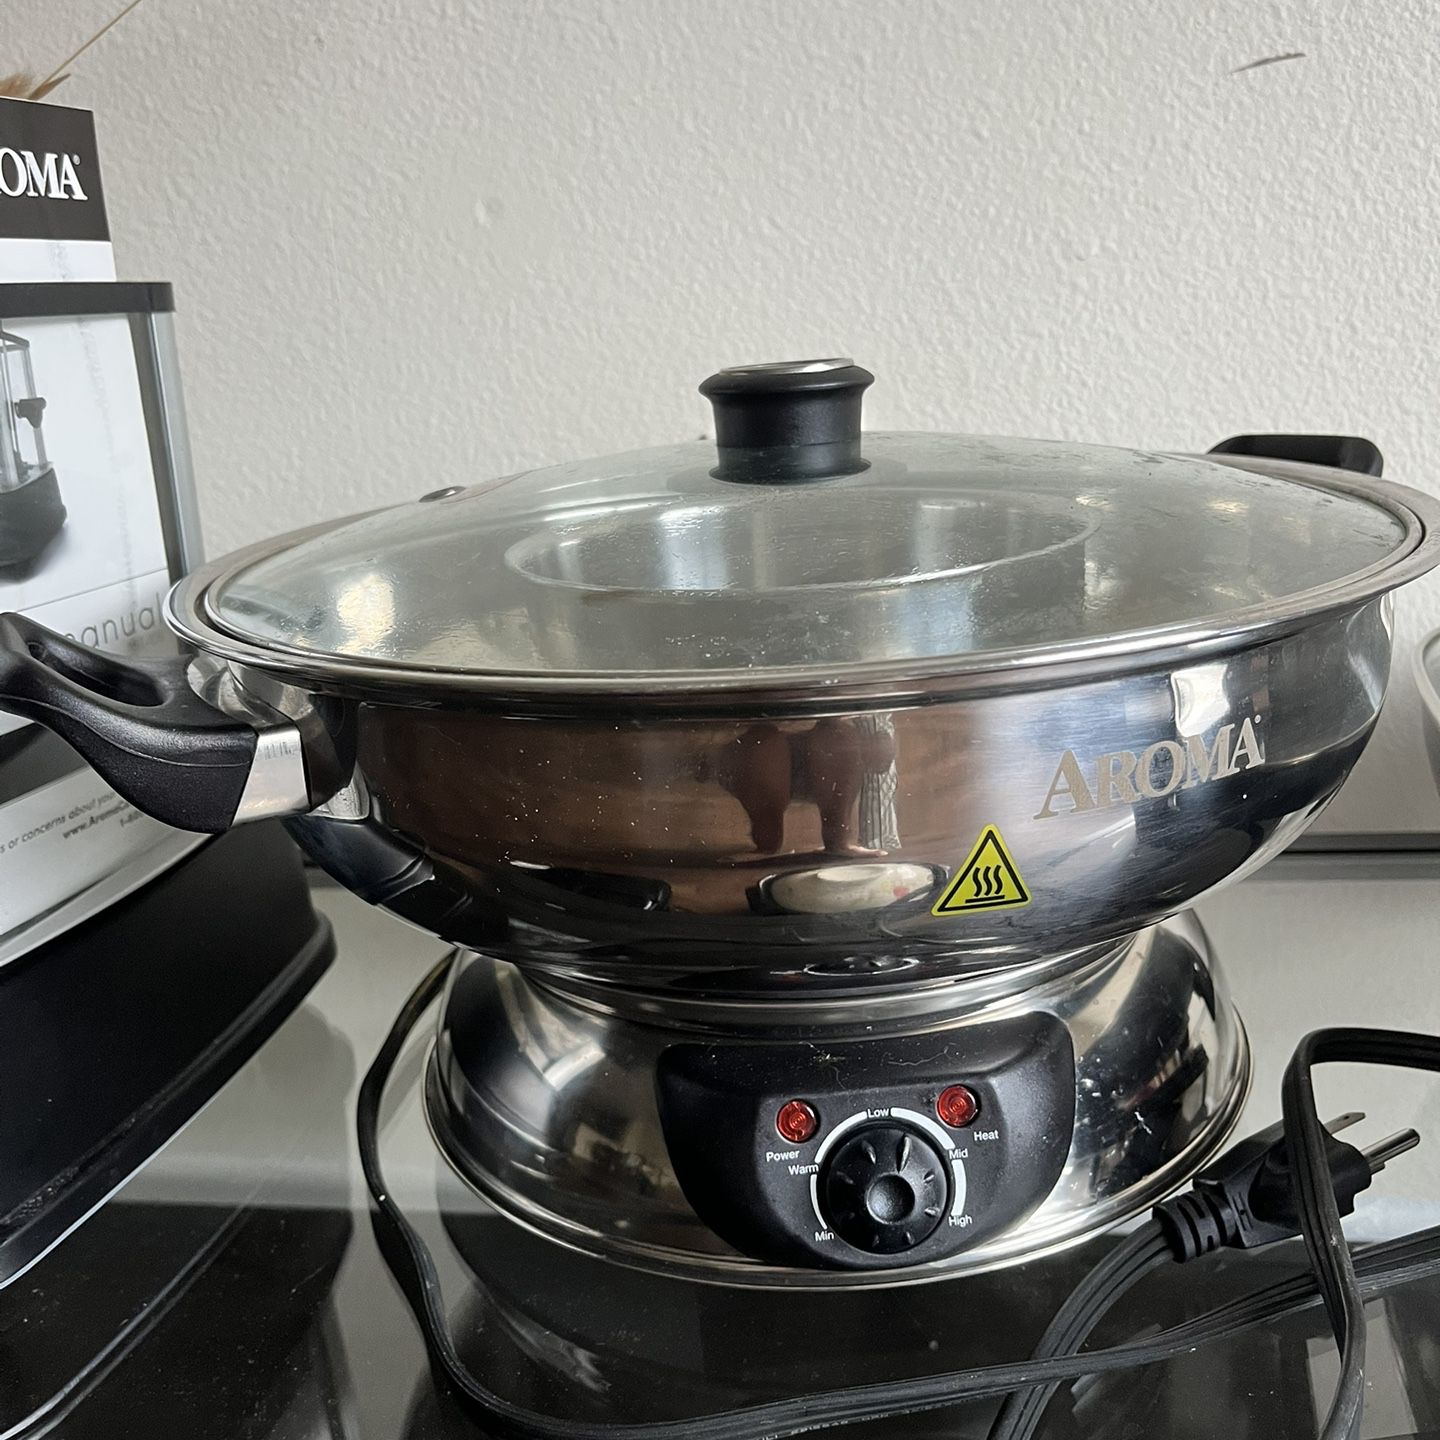 Segmented Electric Hot Pot for Sale in Baltimore, MD - OfferUp